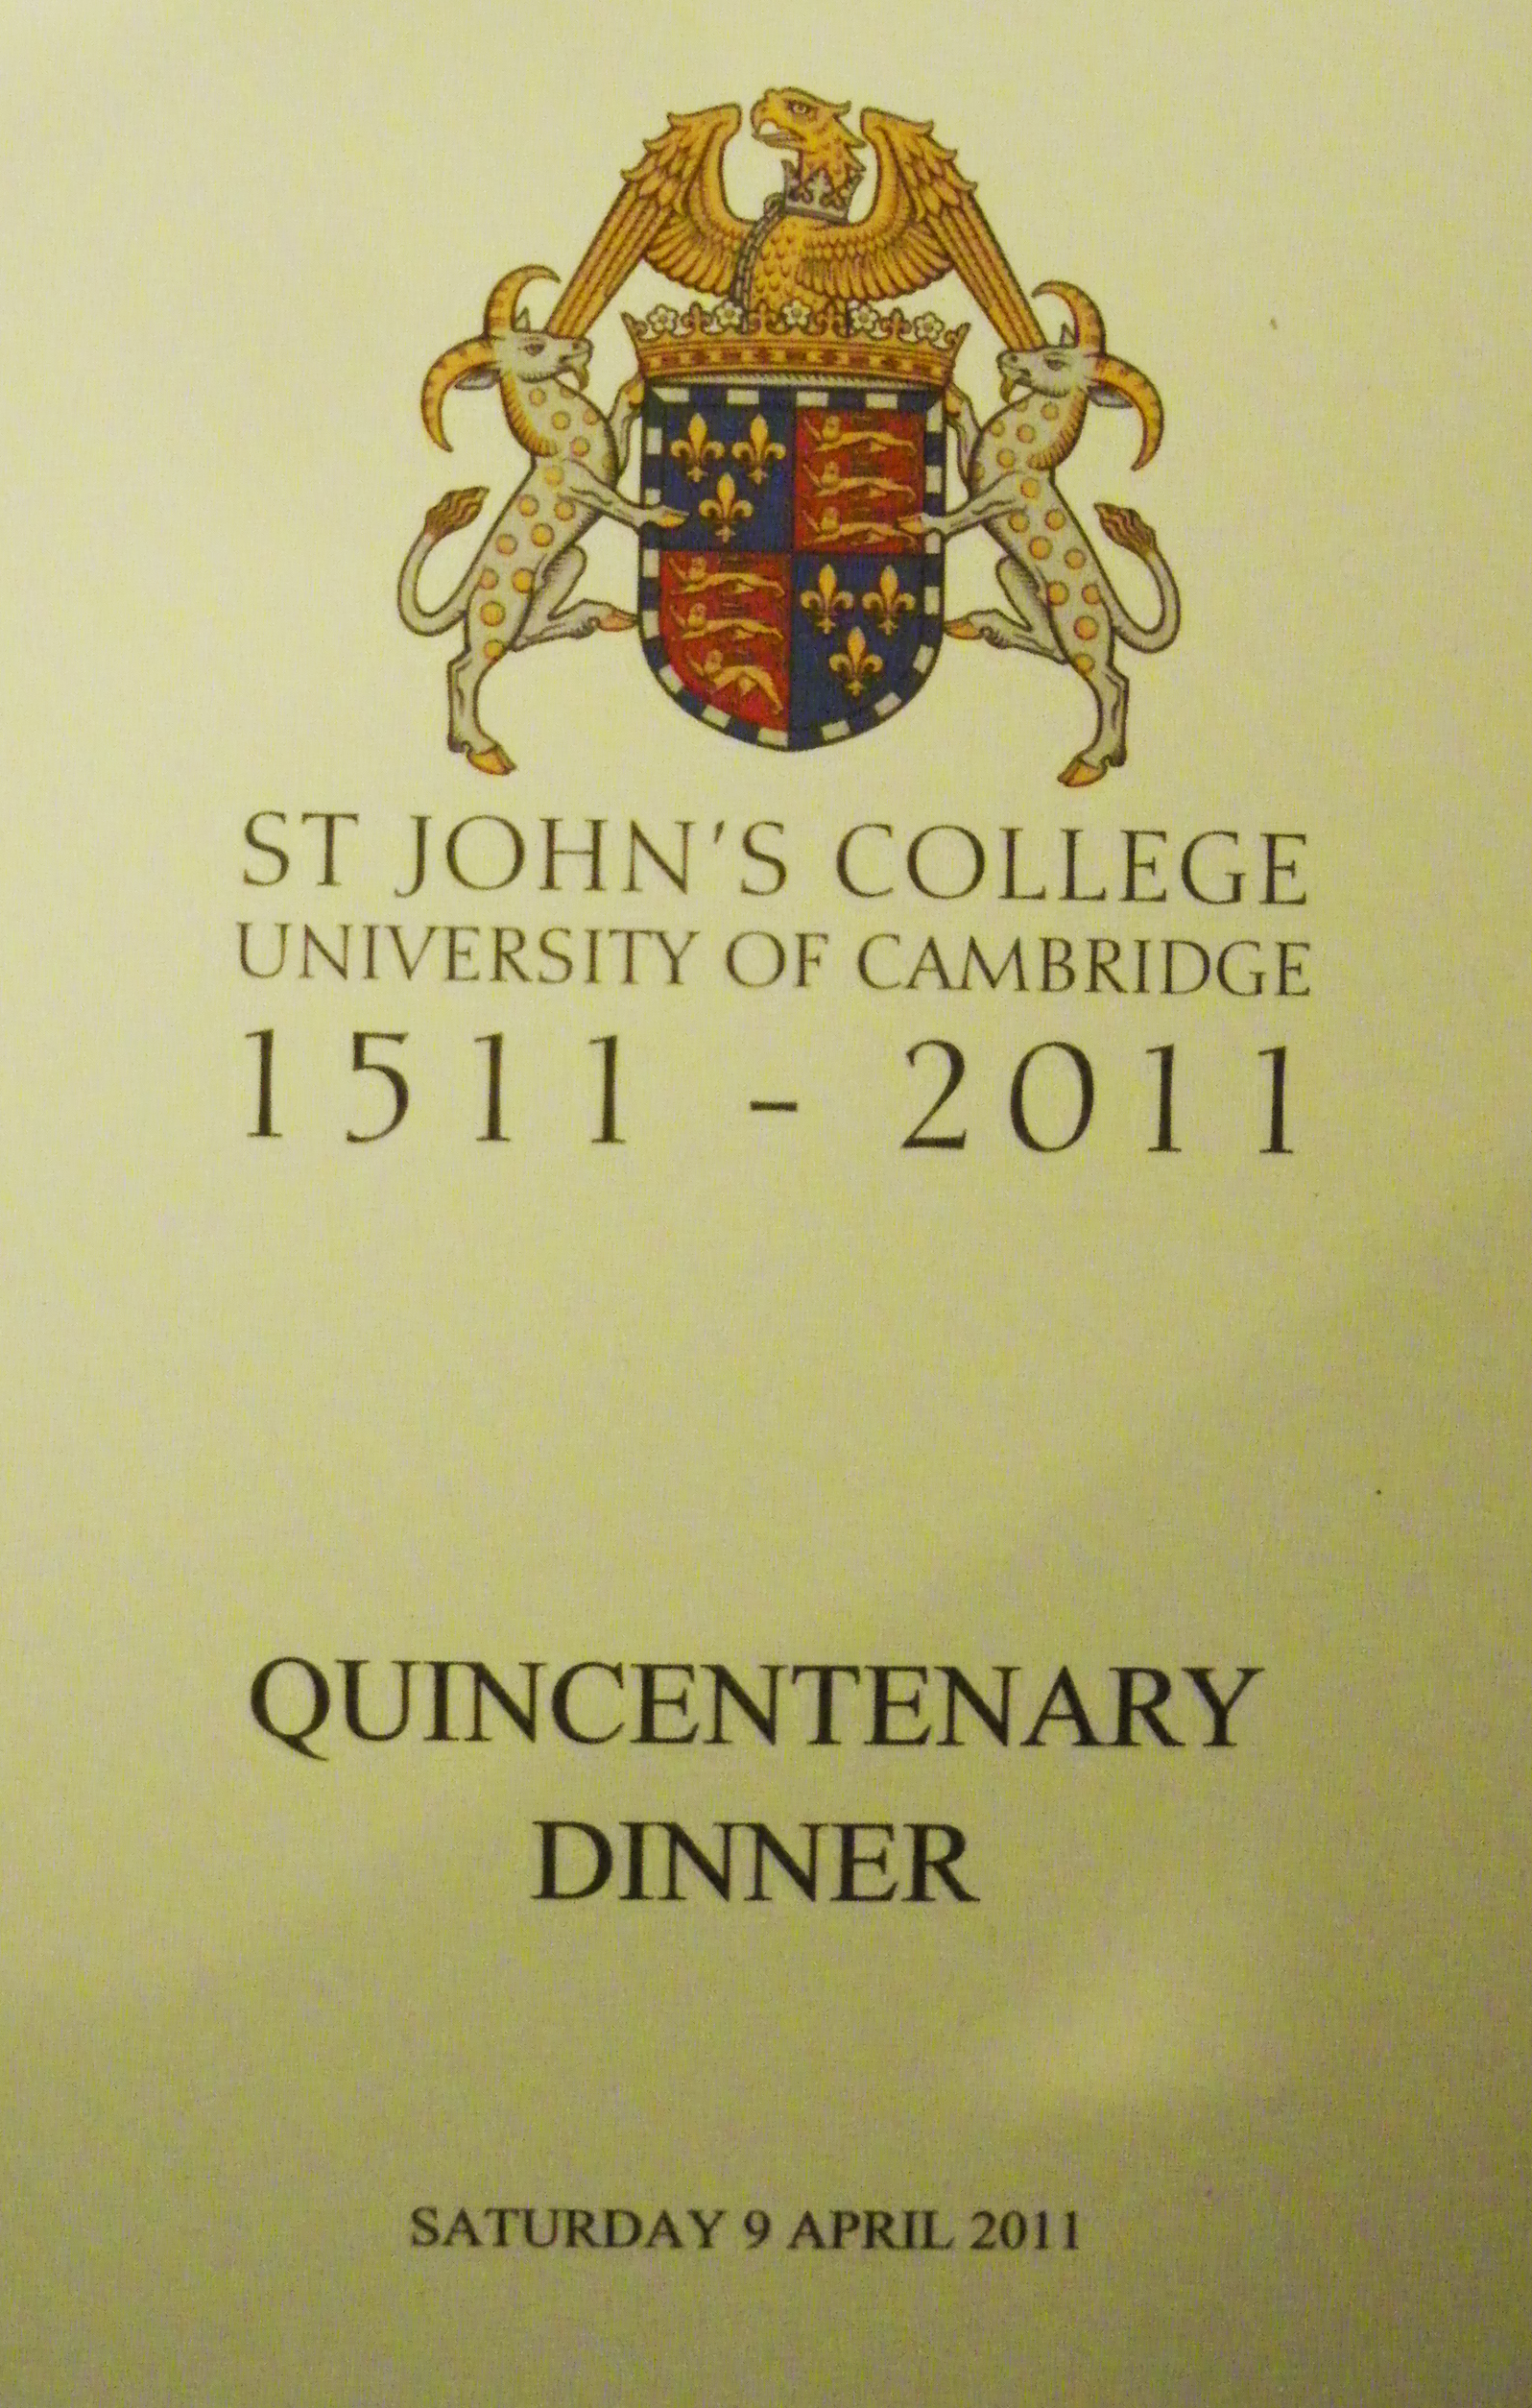 Another dinner menu with the college crest.